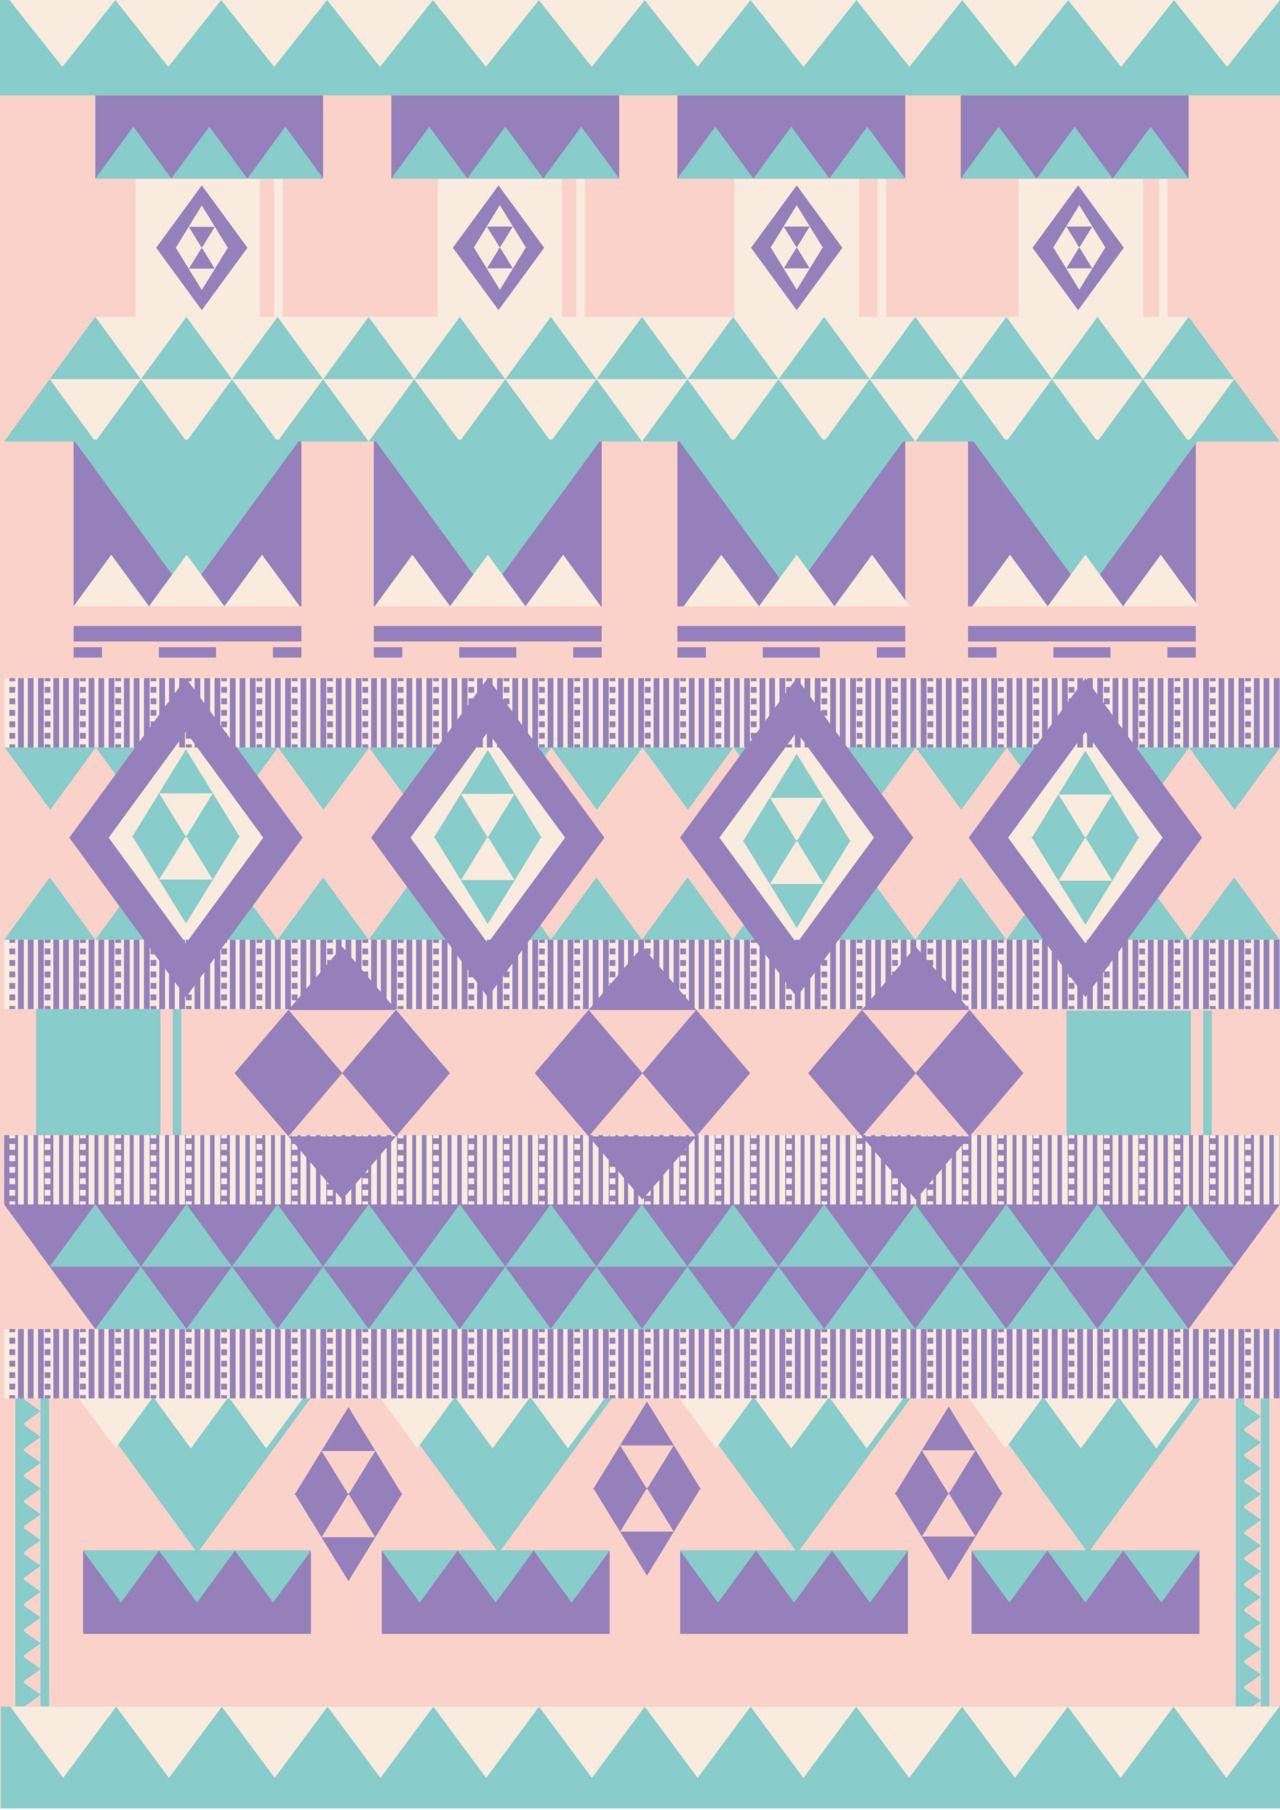 tumblr hipster tribal backgrounds